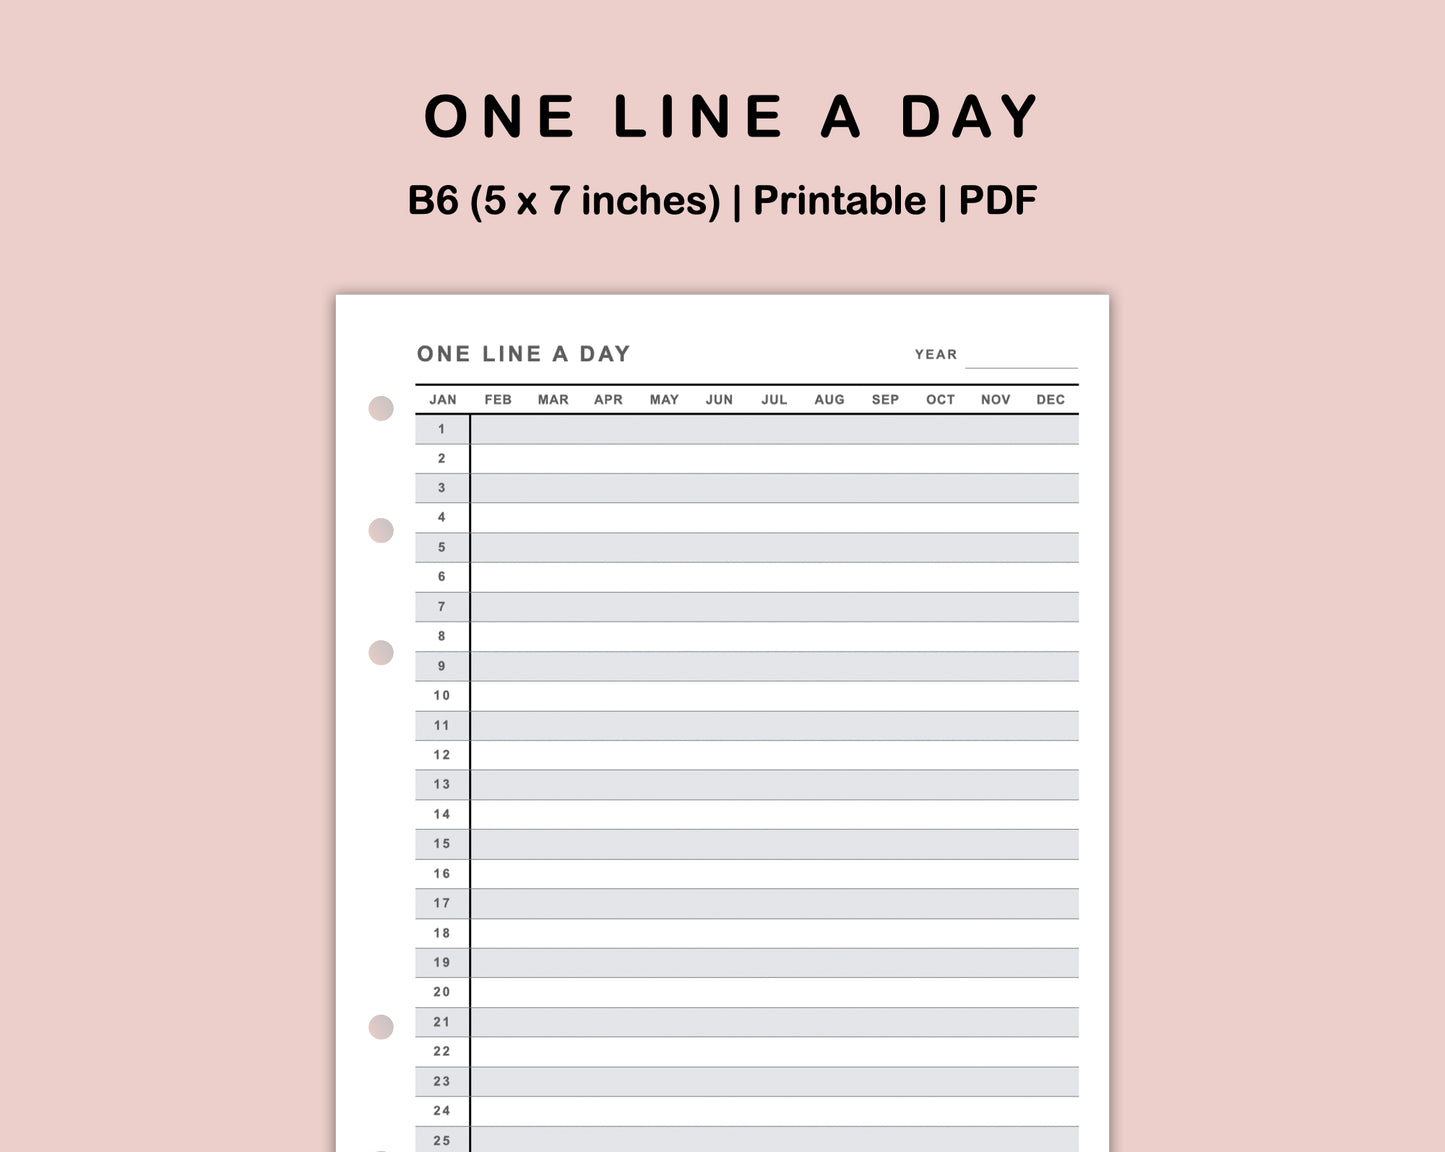 B6 Inserts - One Line A Day